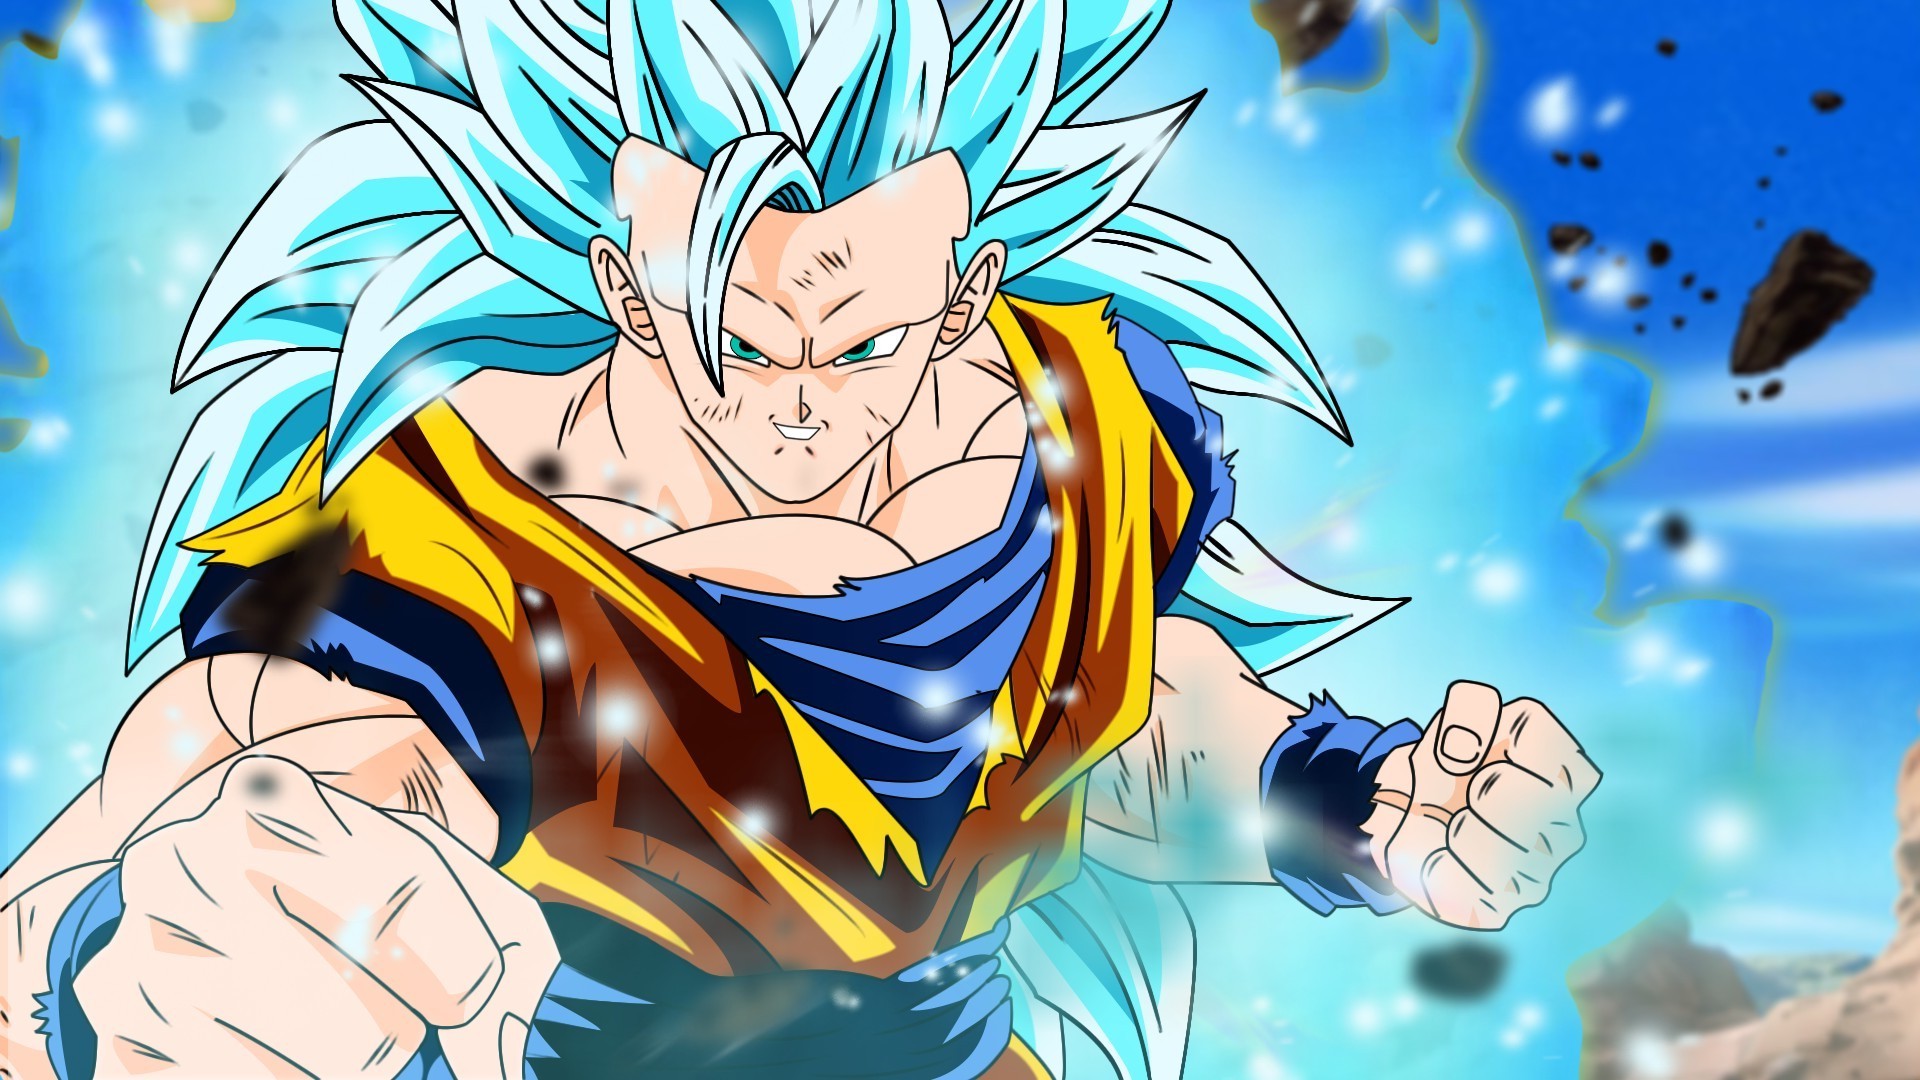 Wallpaper Goku SSJ3 HD with image resolution 1920x1080 pixel. You can make this wallpaper for your Desktop Computer Backgrounds, Mac Wallpapers, Android Lock screen or iPhone Screensavers